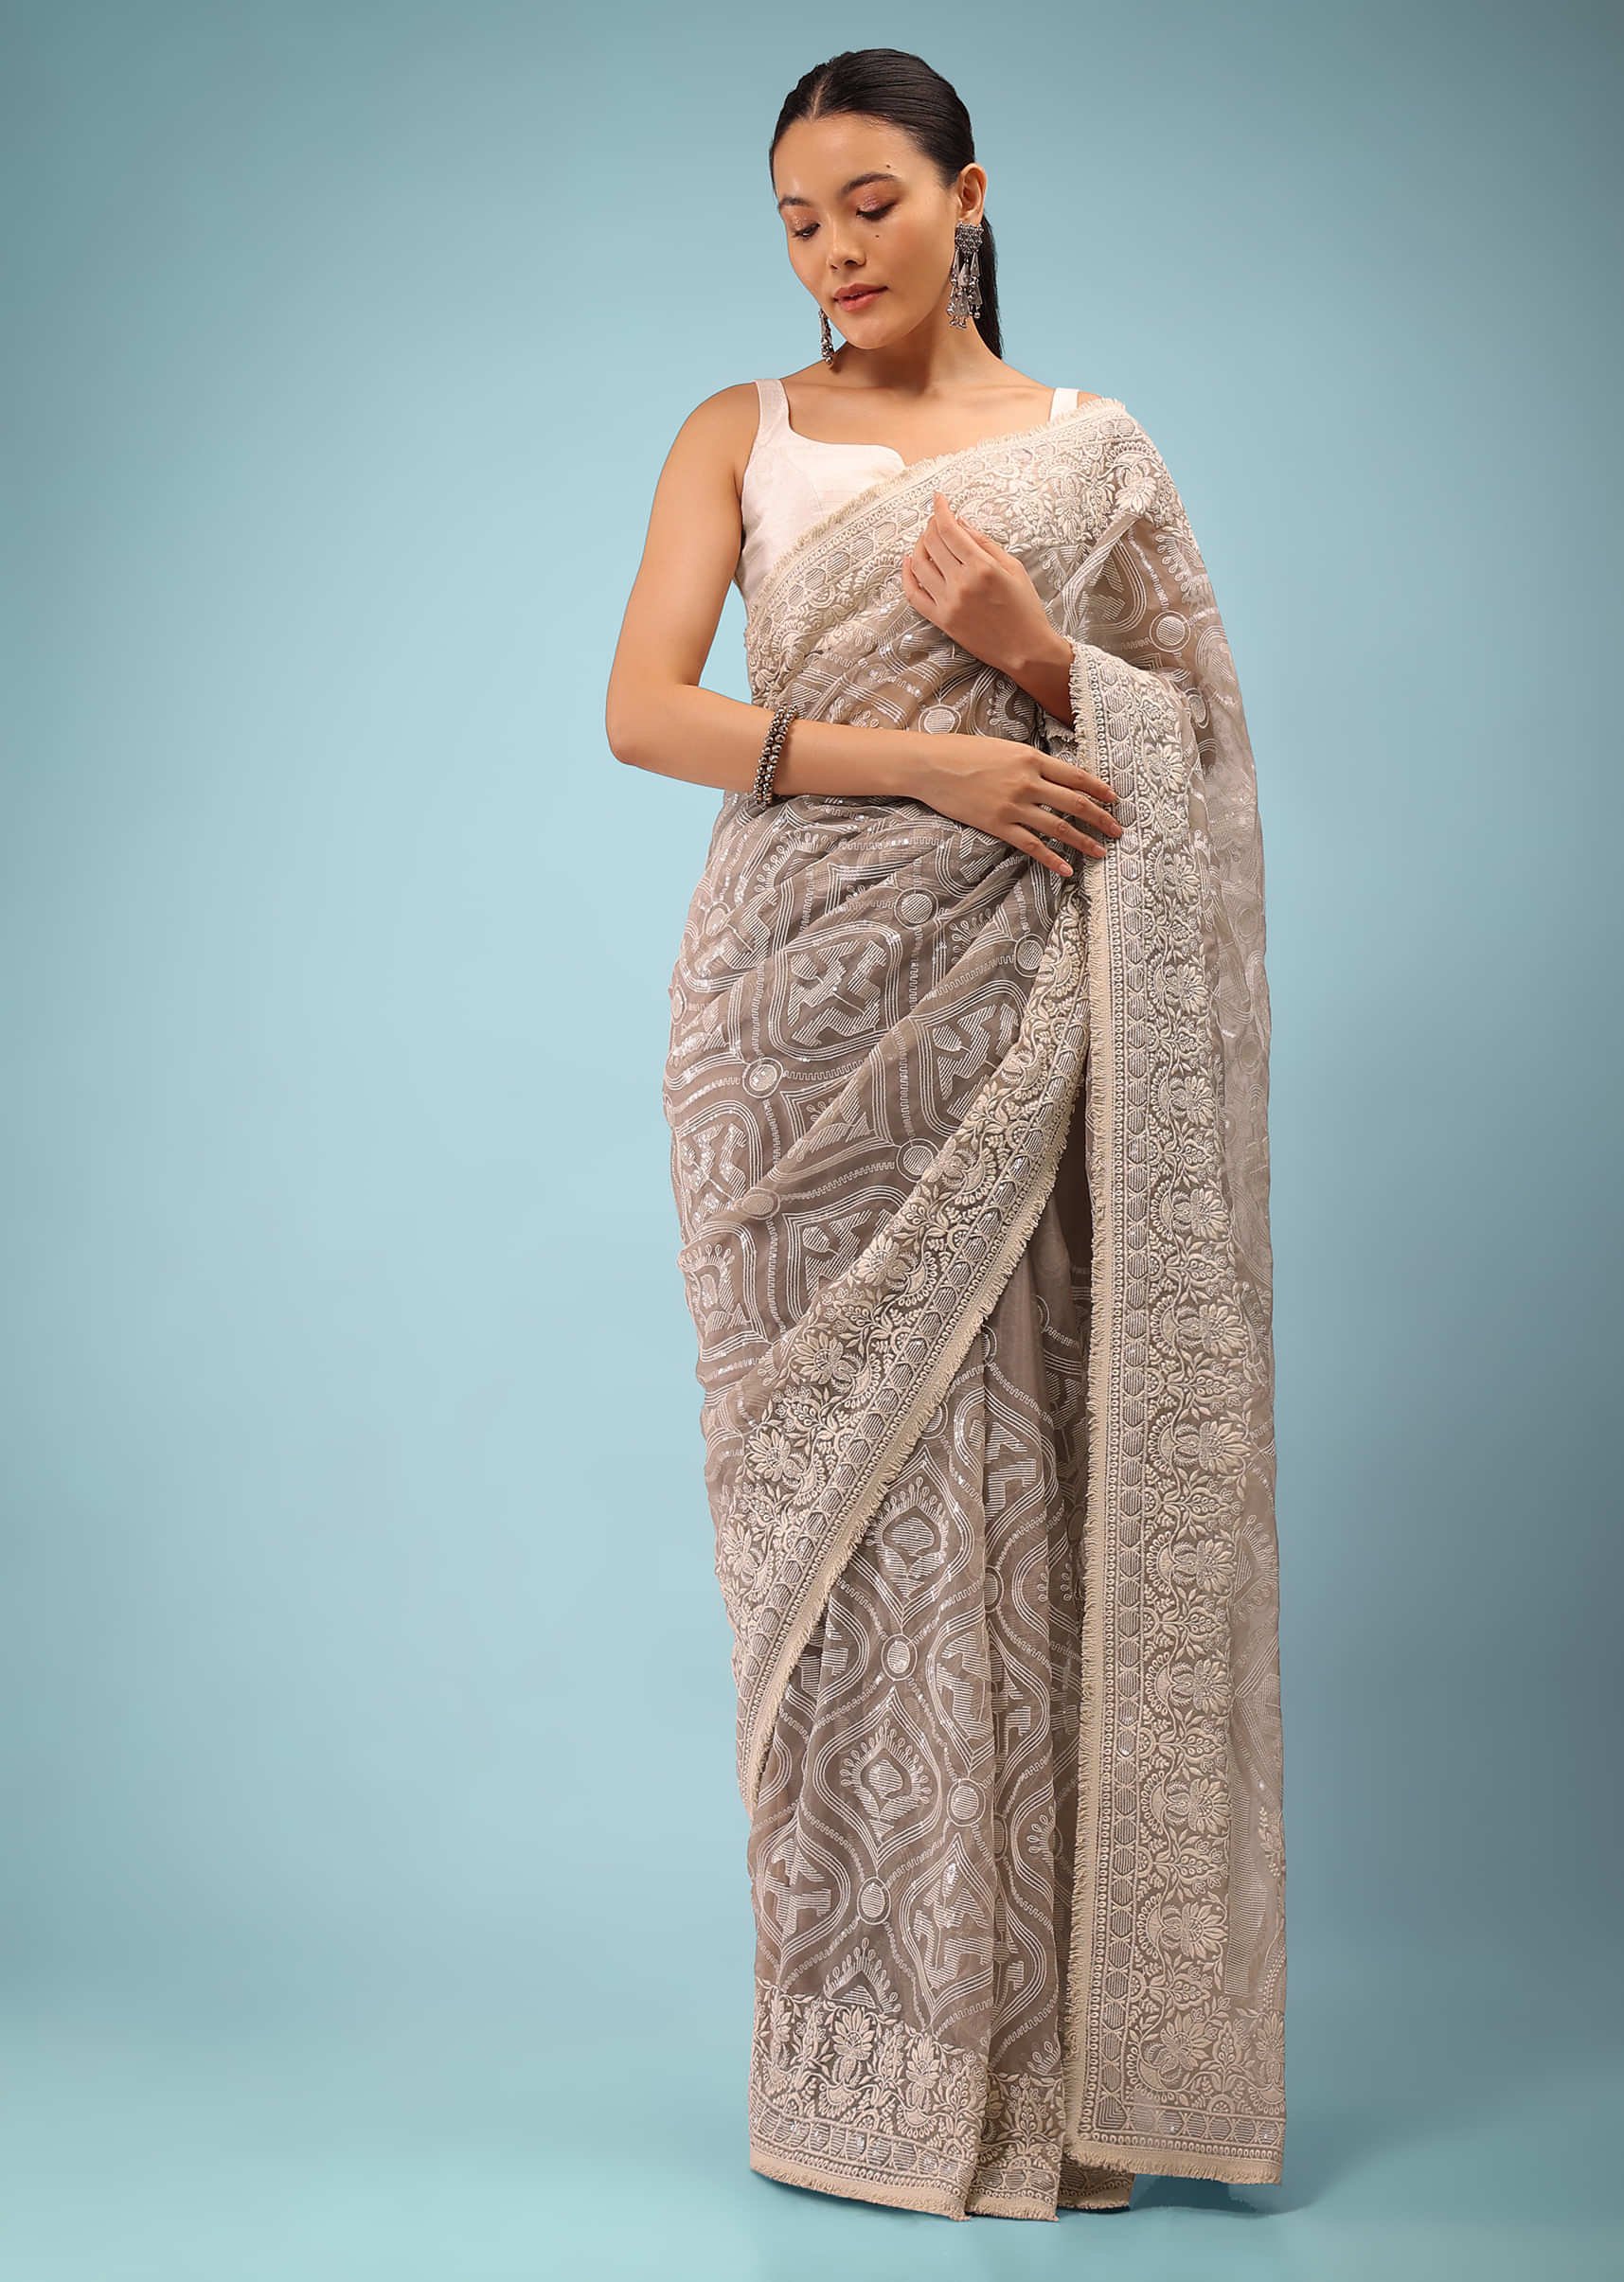 Fog Grey Organza Saree In Moroccan Lucknowi Thread Work, It Has Sequins Embroidery Detailing All Over